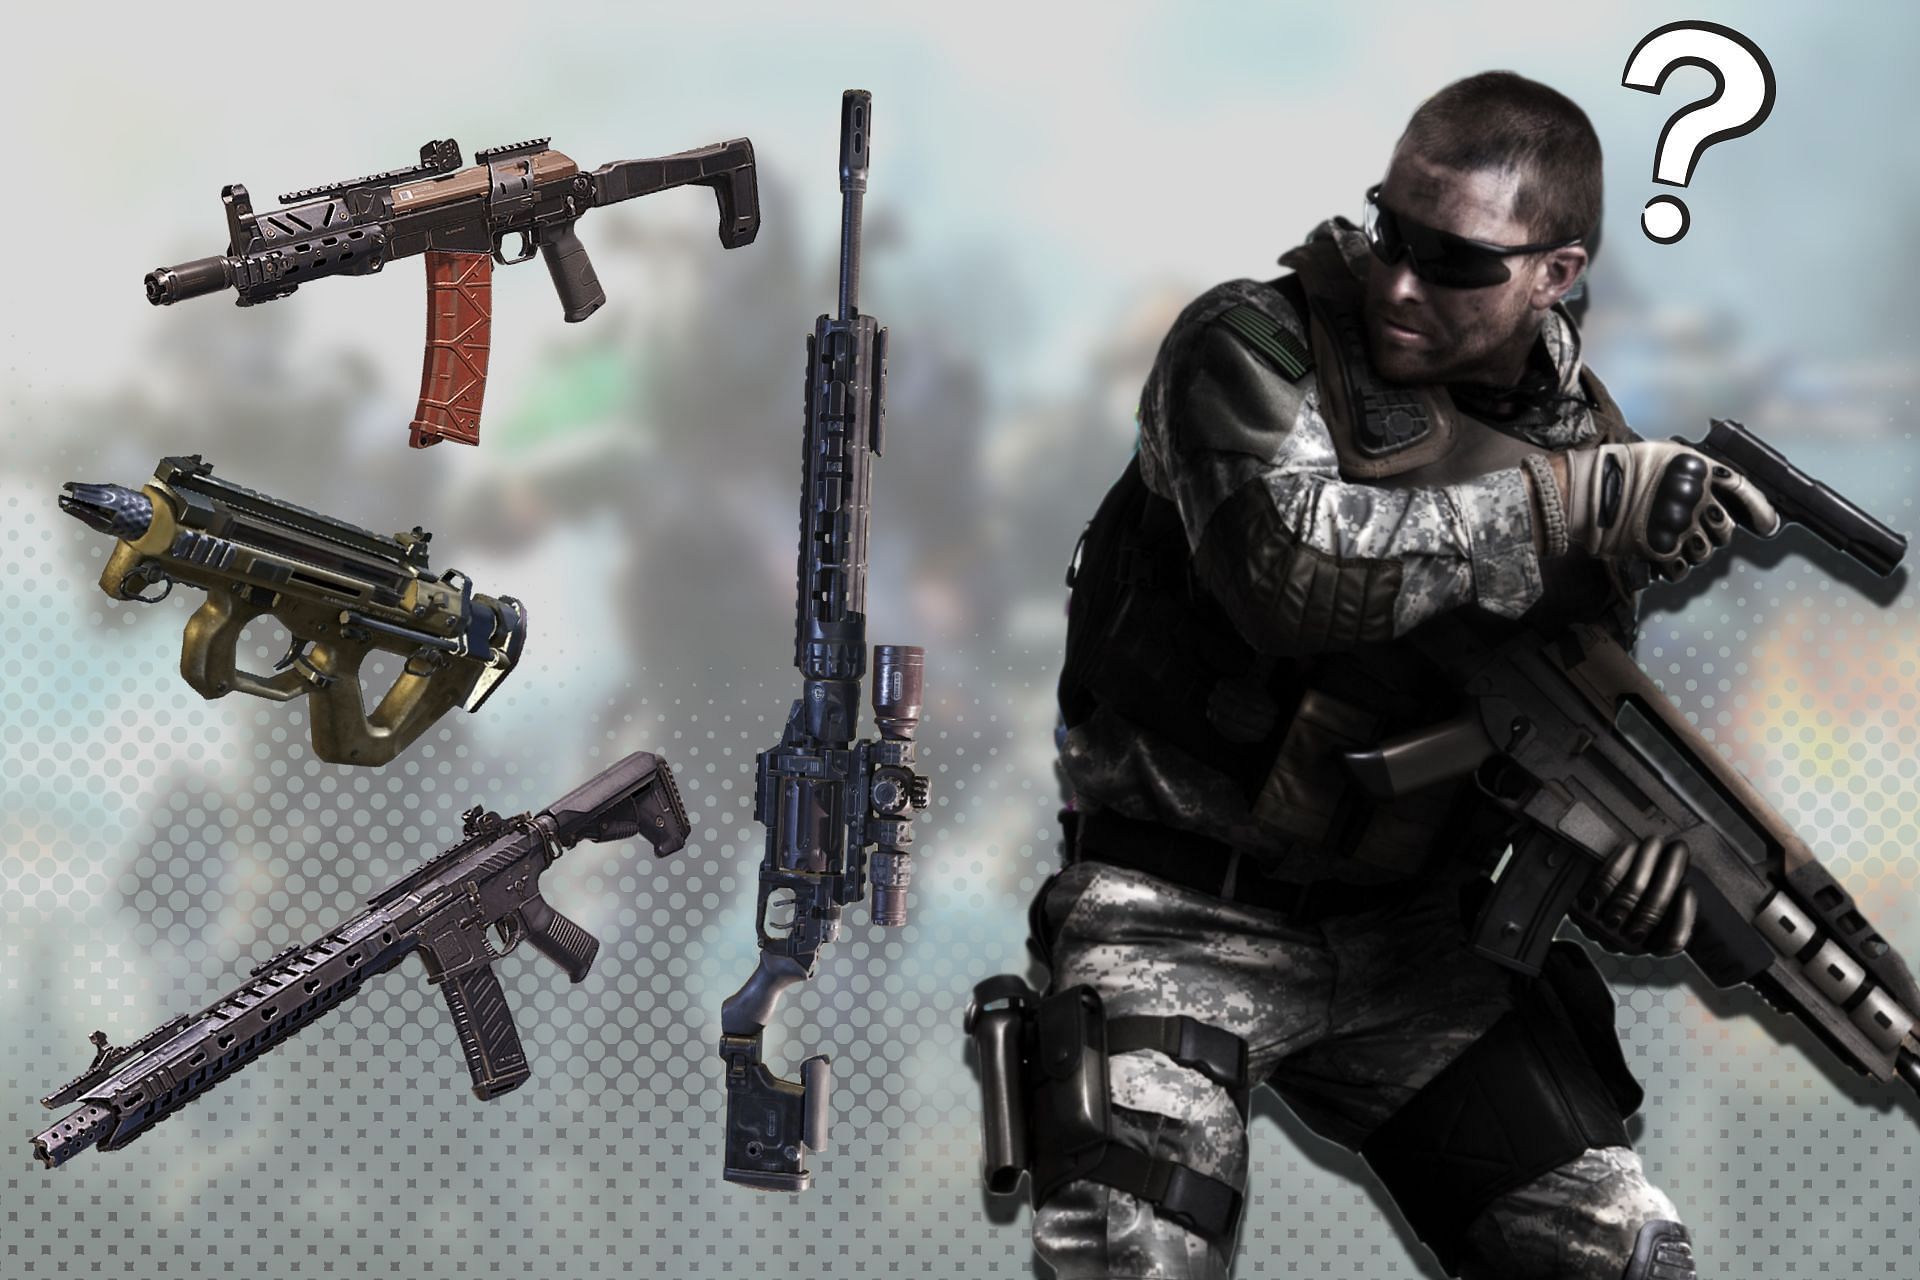 Best Weapons to Dominate the Battlegrounds in Call of Duty Mobile